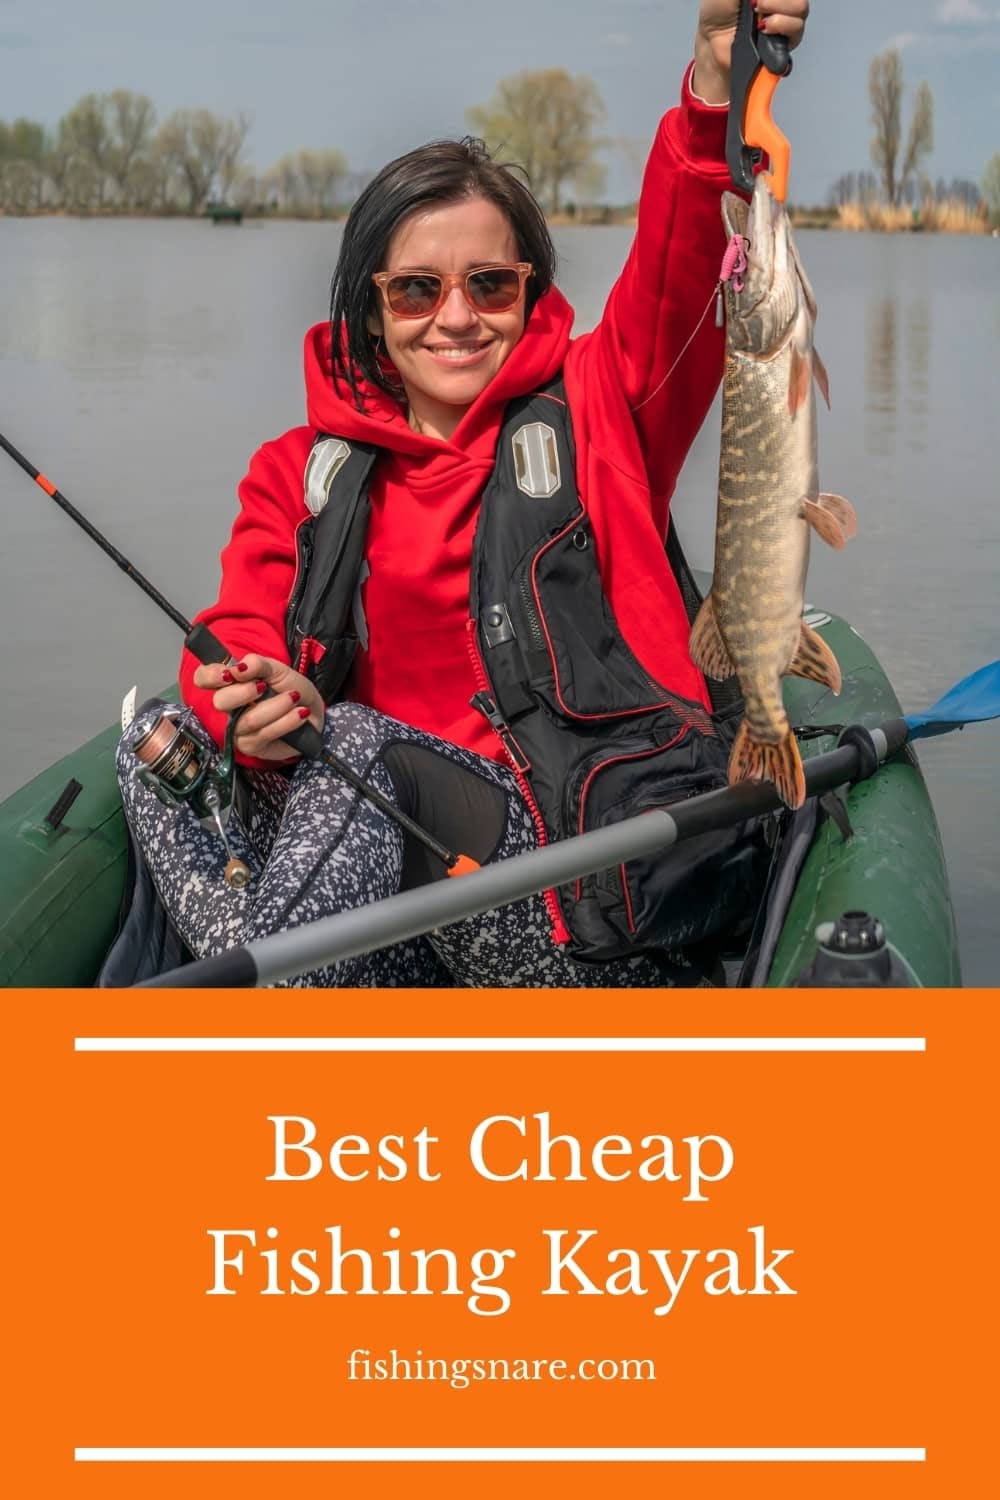 7 Best Cheap Fishing Kayak Reviews for You in Late 2020